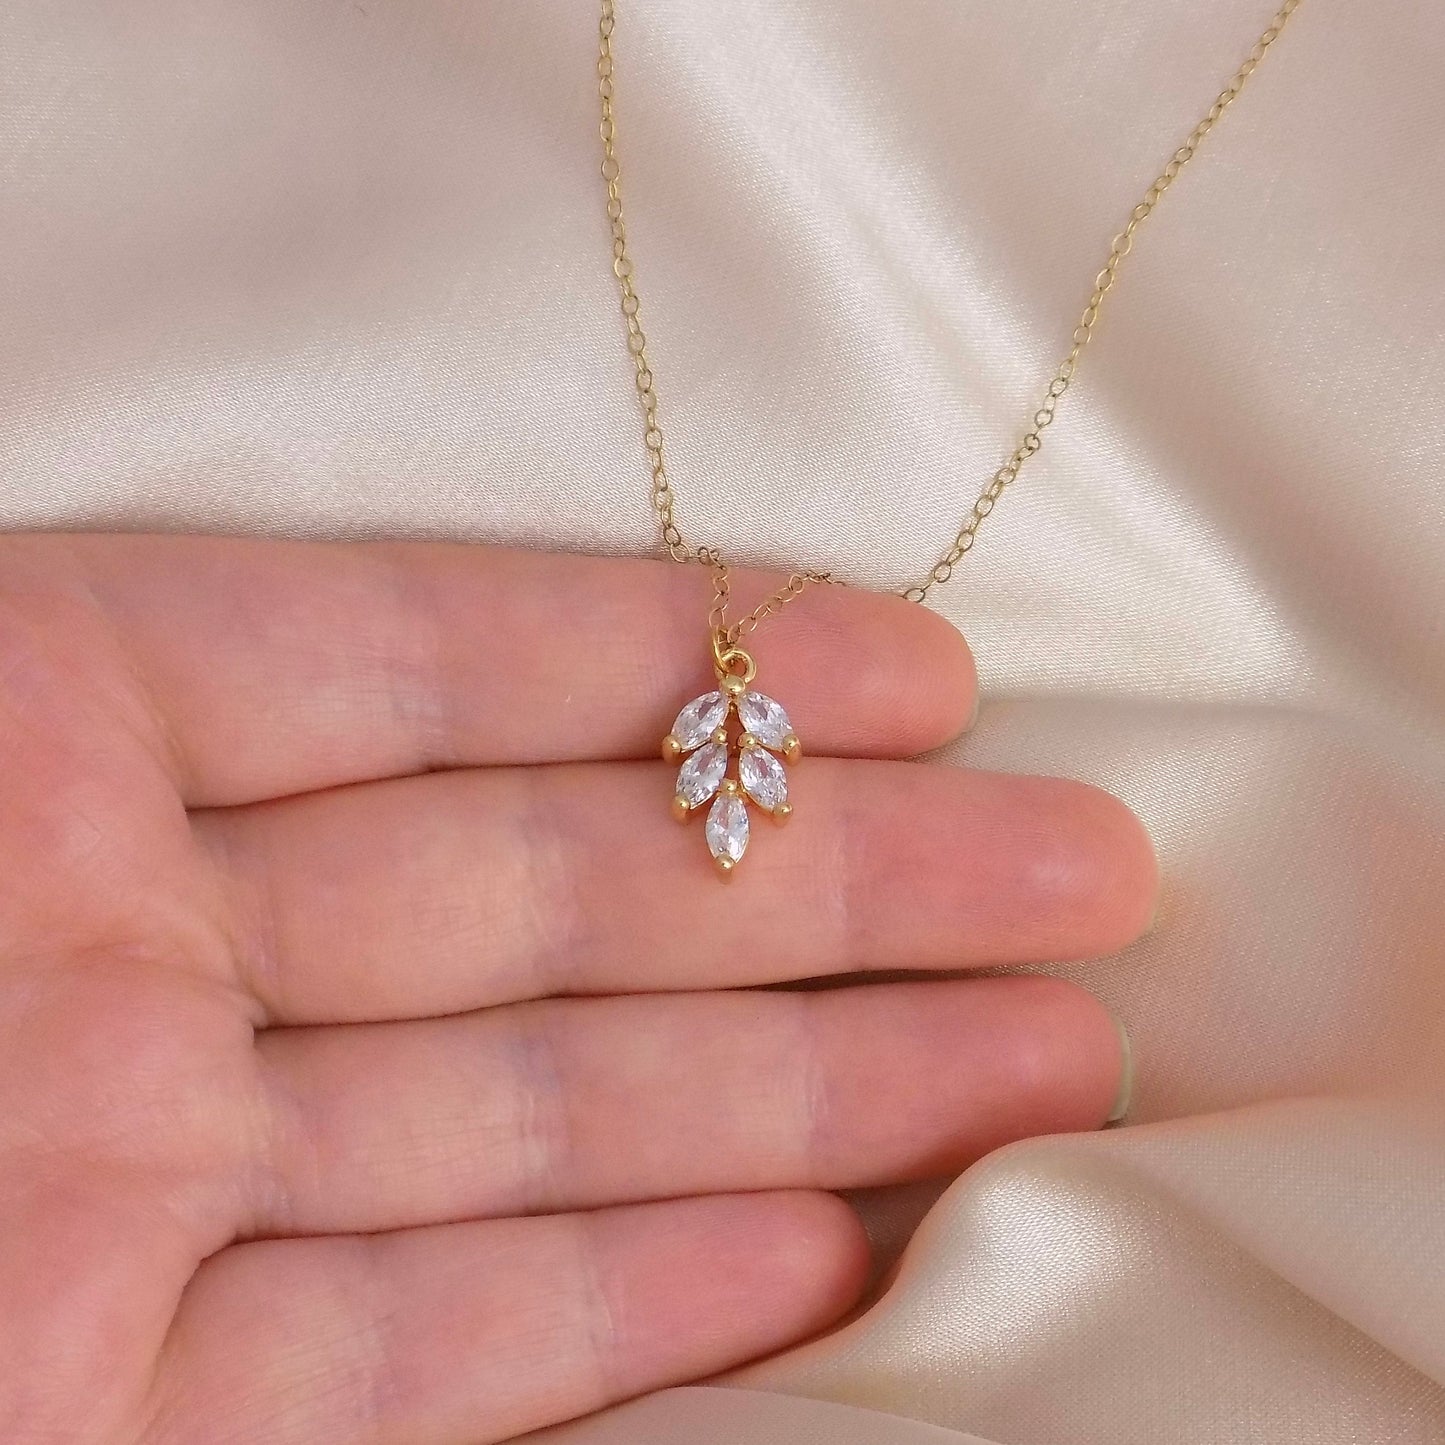 Bridal Necklace, Clear Crystal Sparkly Leaf Necklace Gold, Dainty Crystal Jewelry, Gifts For Her, M7-43